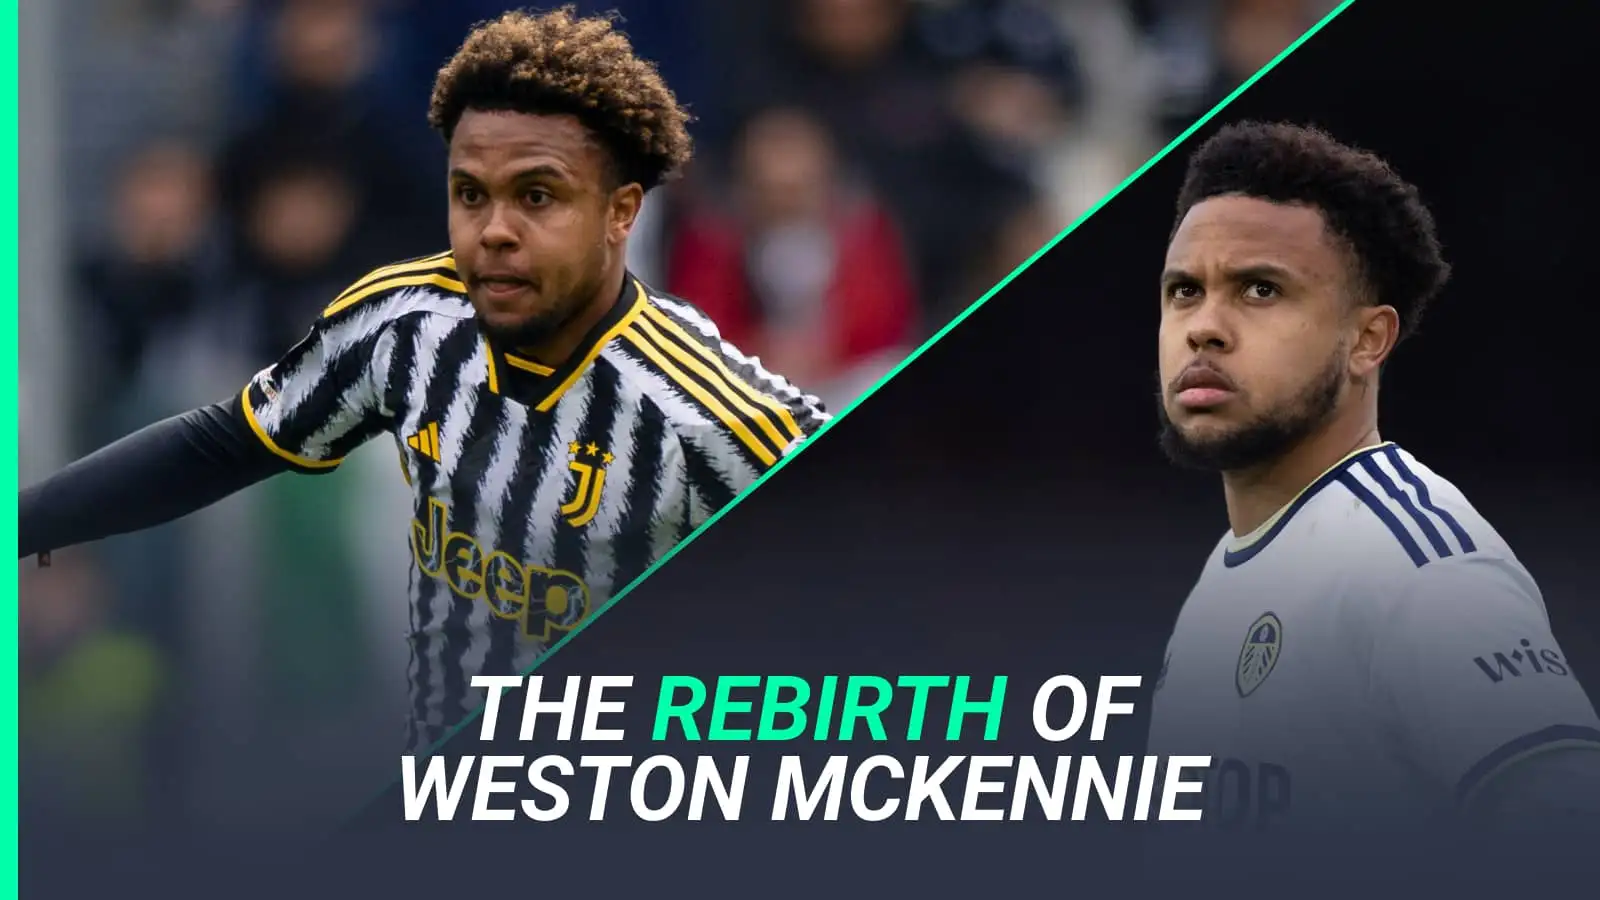 Weston McKennie: The rebirth of the Juventus star, why Man Utd now want to sign him and the truths around his Leeds struggles